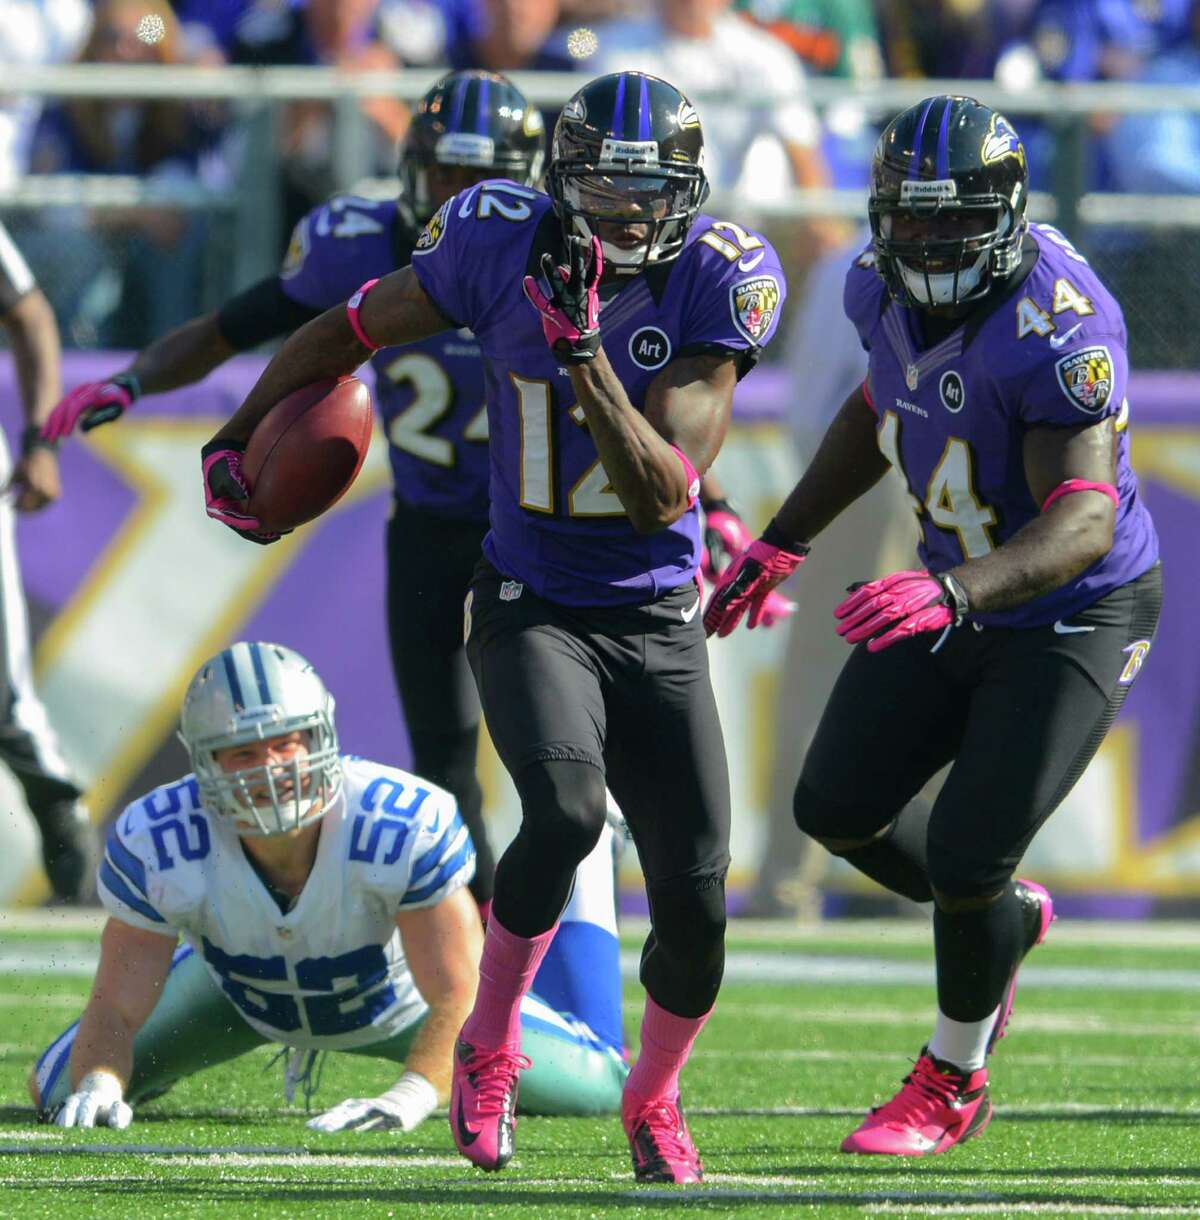 Jacoby Jones tied an NFL record with a 108-yard kickoff return for the Ravens in last Sunday's victory over the Cowboys.